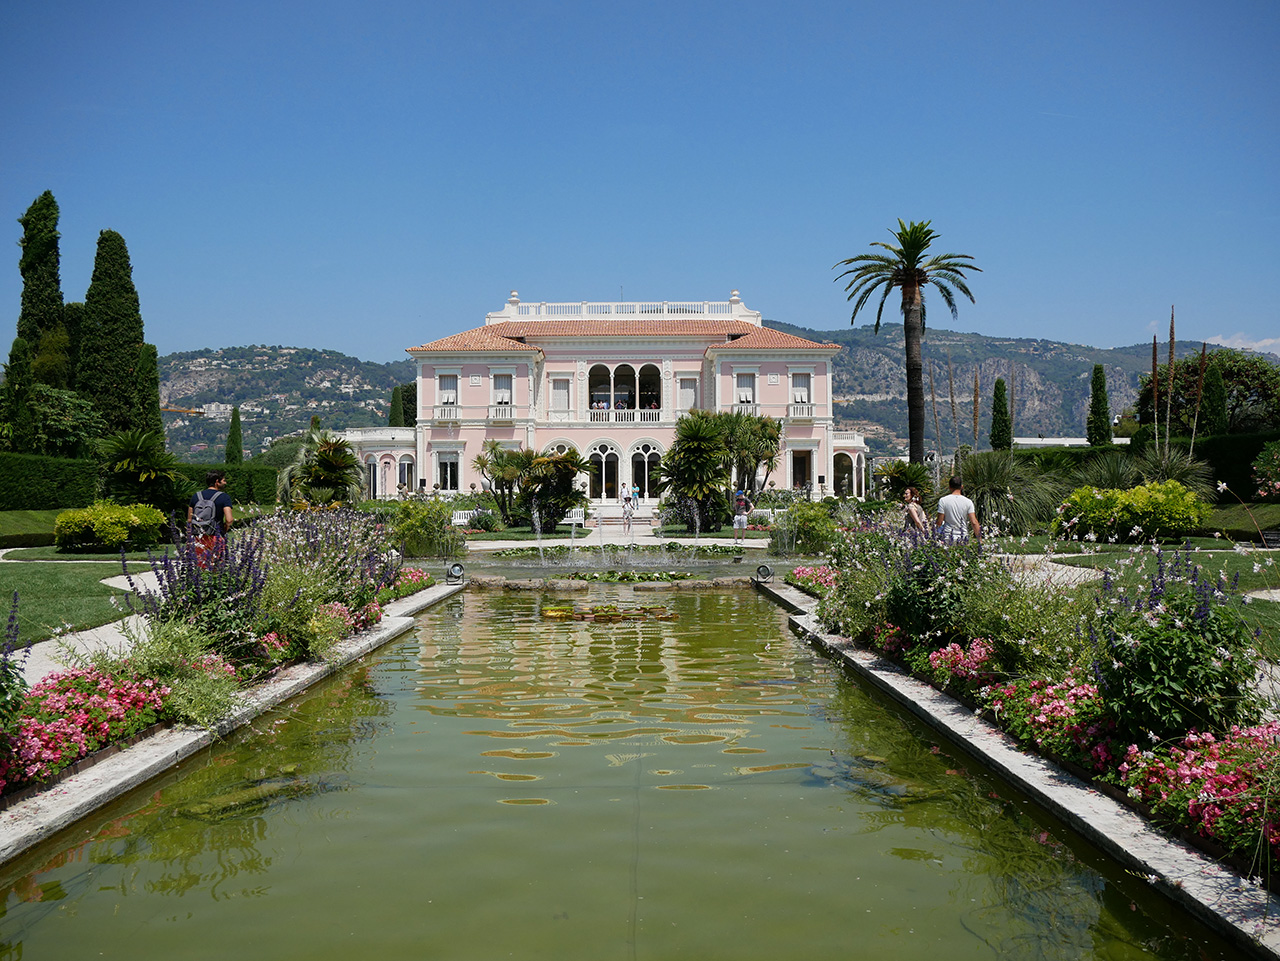 Villa Ephrussi de Rothschild - things to do on the French Riviera